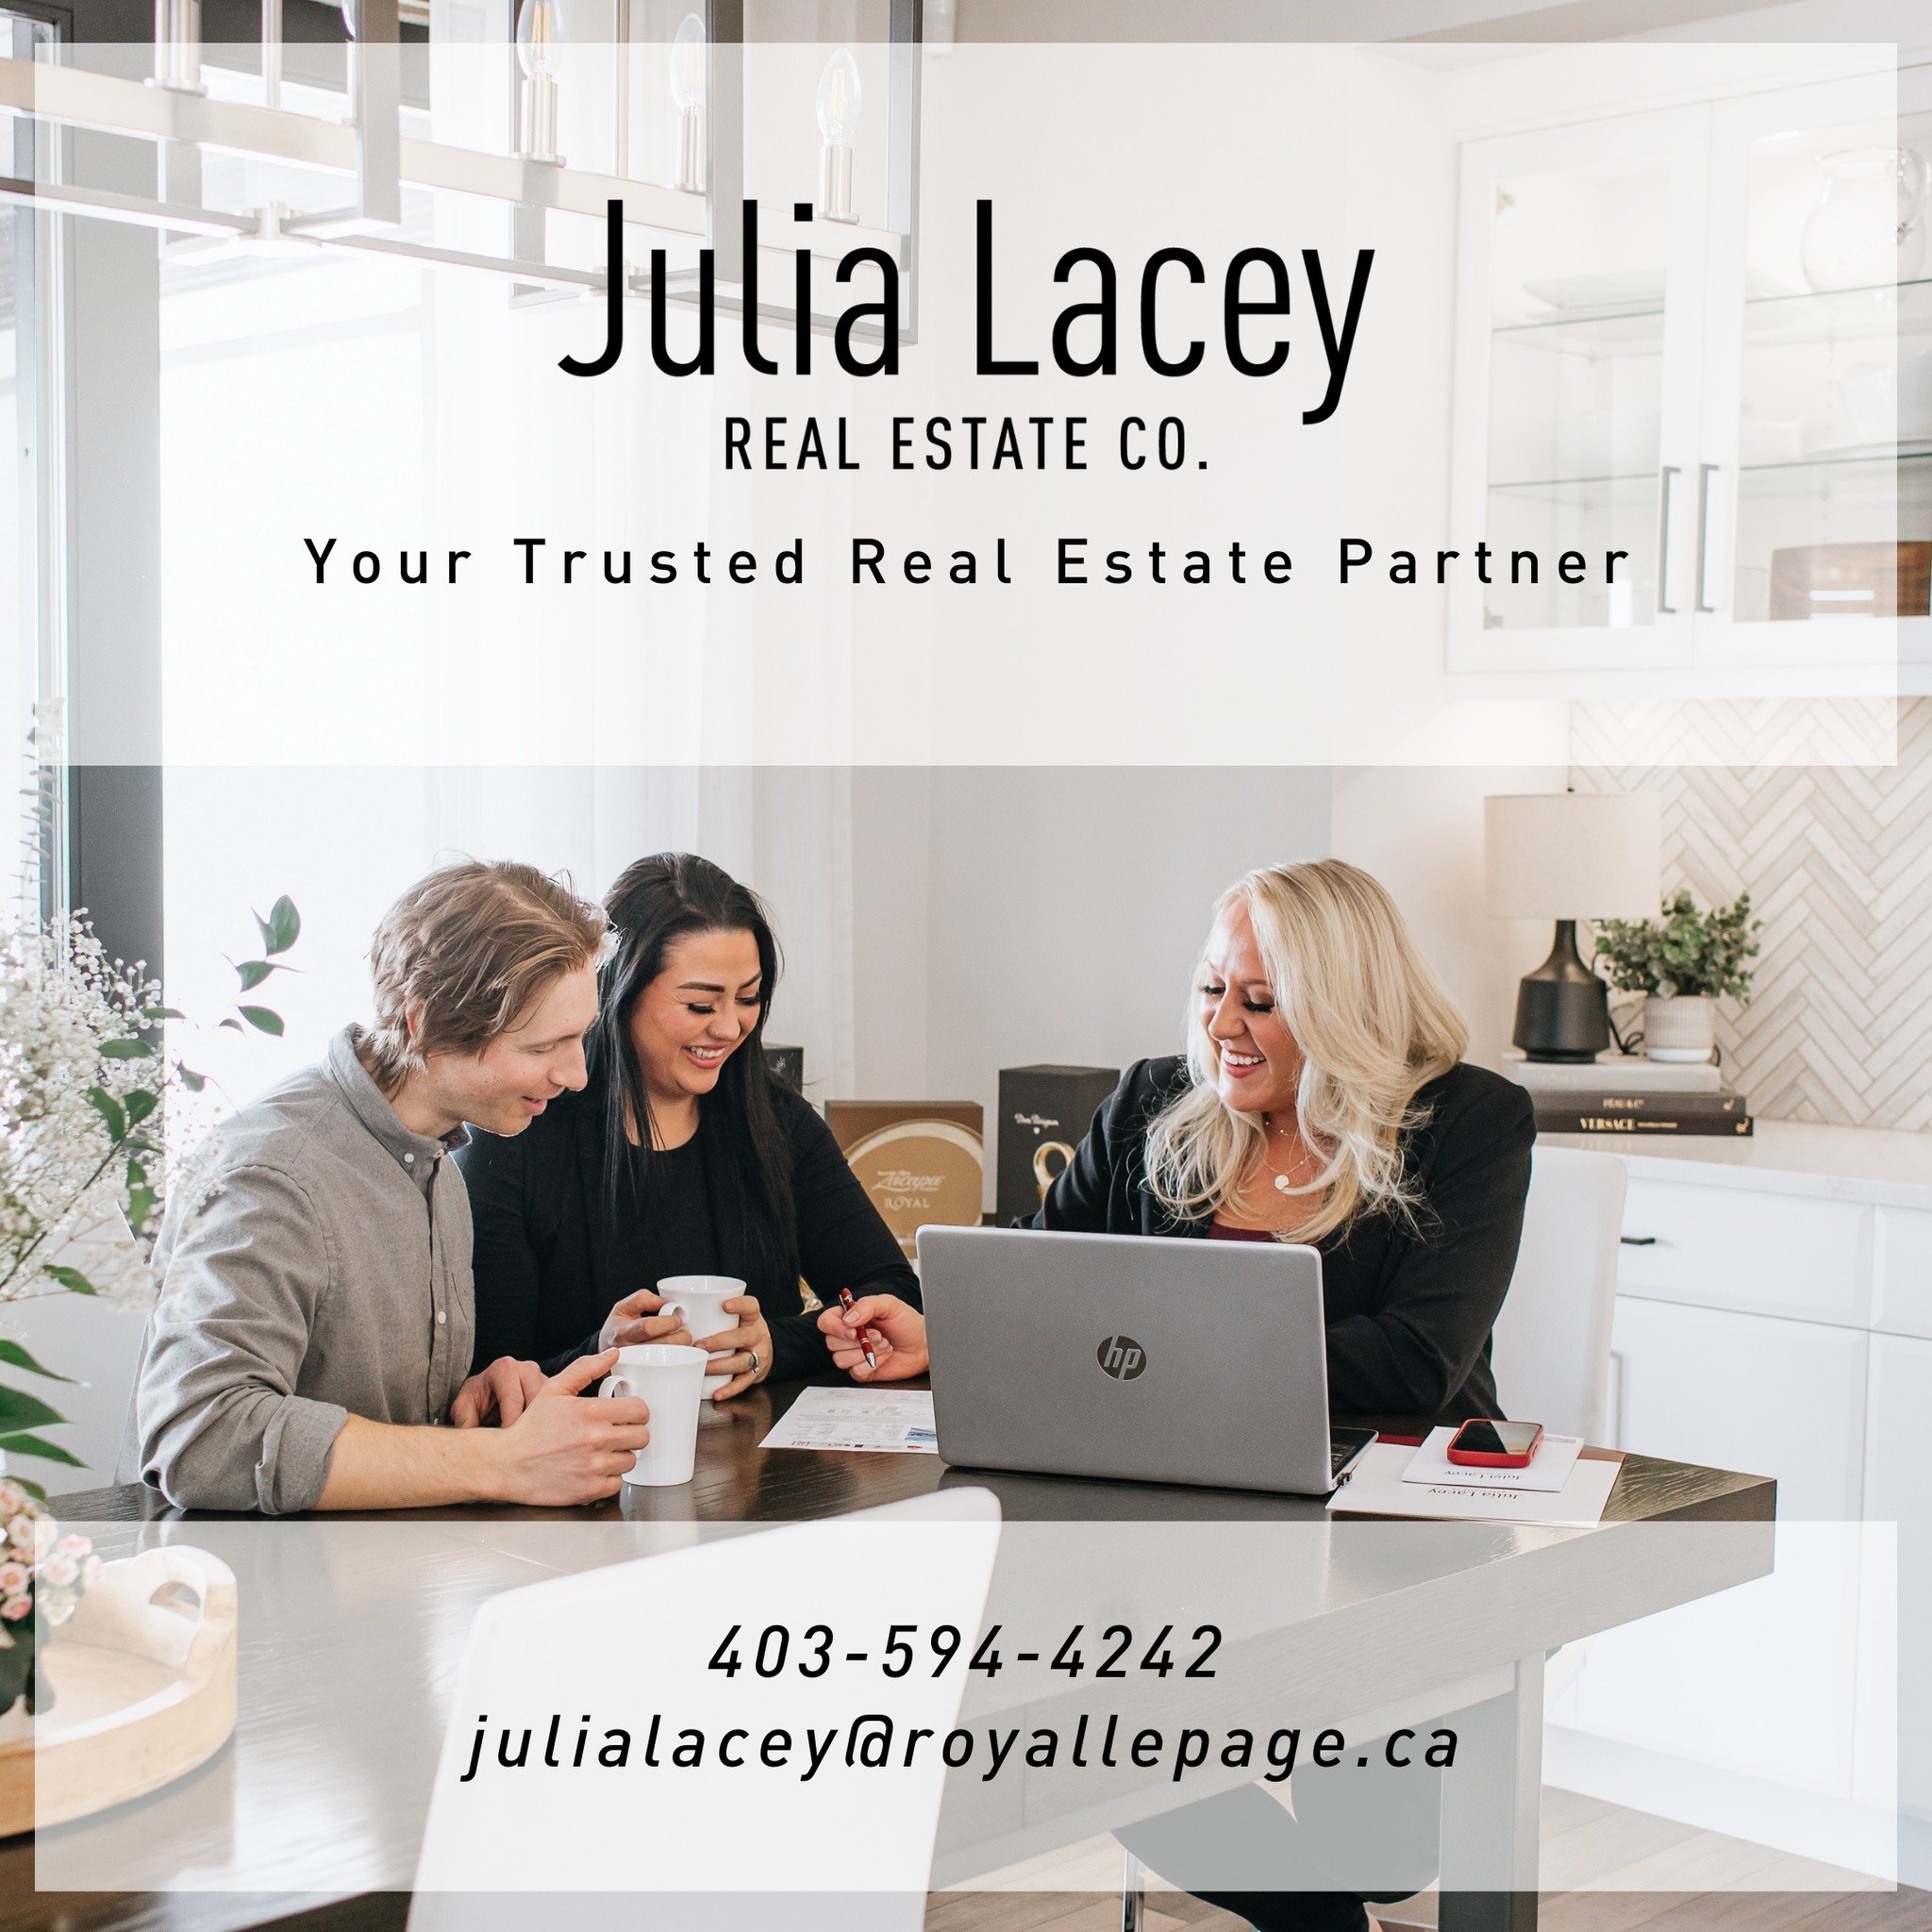 Making Your Dream Home a Reality

What to Expect When You Are Working with Julia Lacey:

One-on-One Guidance: Personalized attention for every client.
Expert Knowledge: Deep understanding of local market trends.
Tailored Strategies: Customized plans 